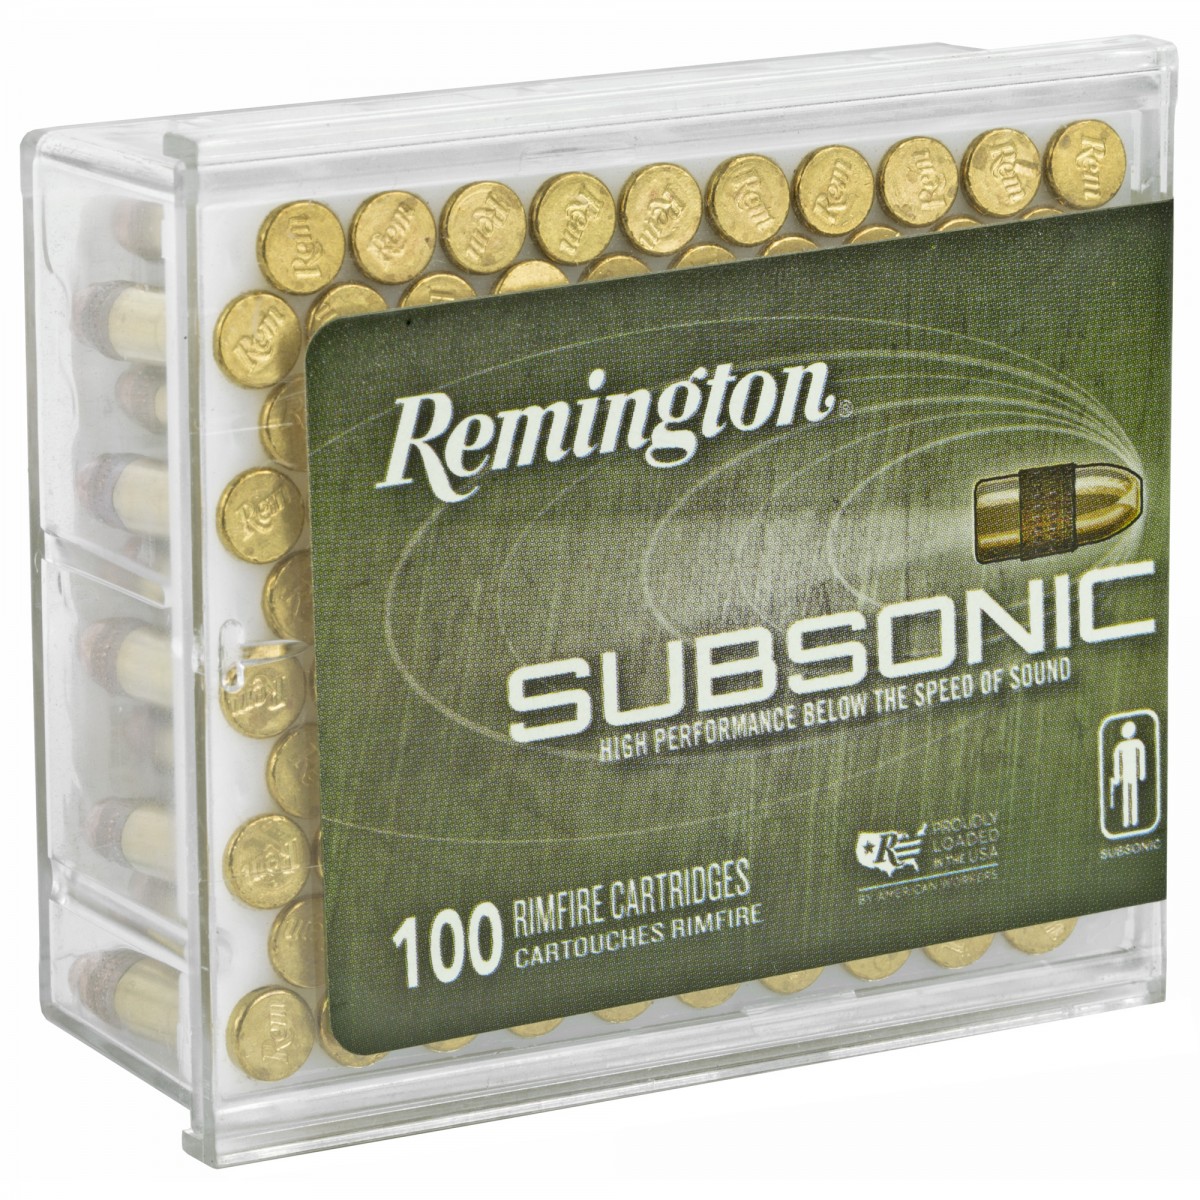 .22 subsonic rounds